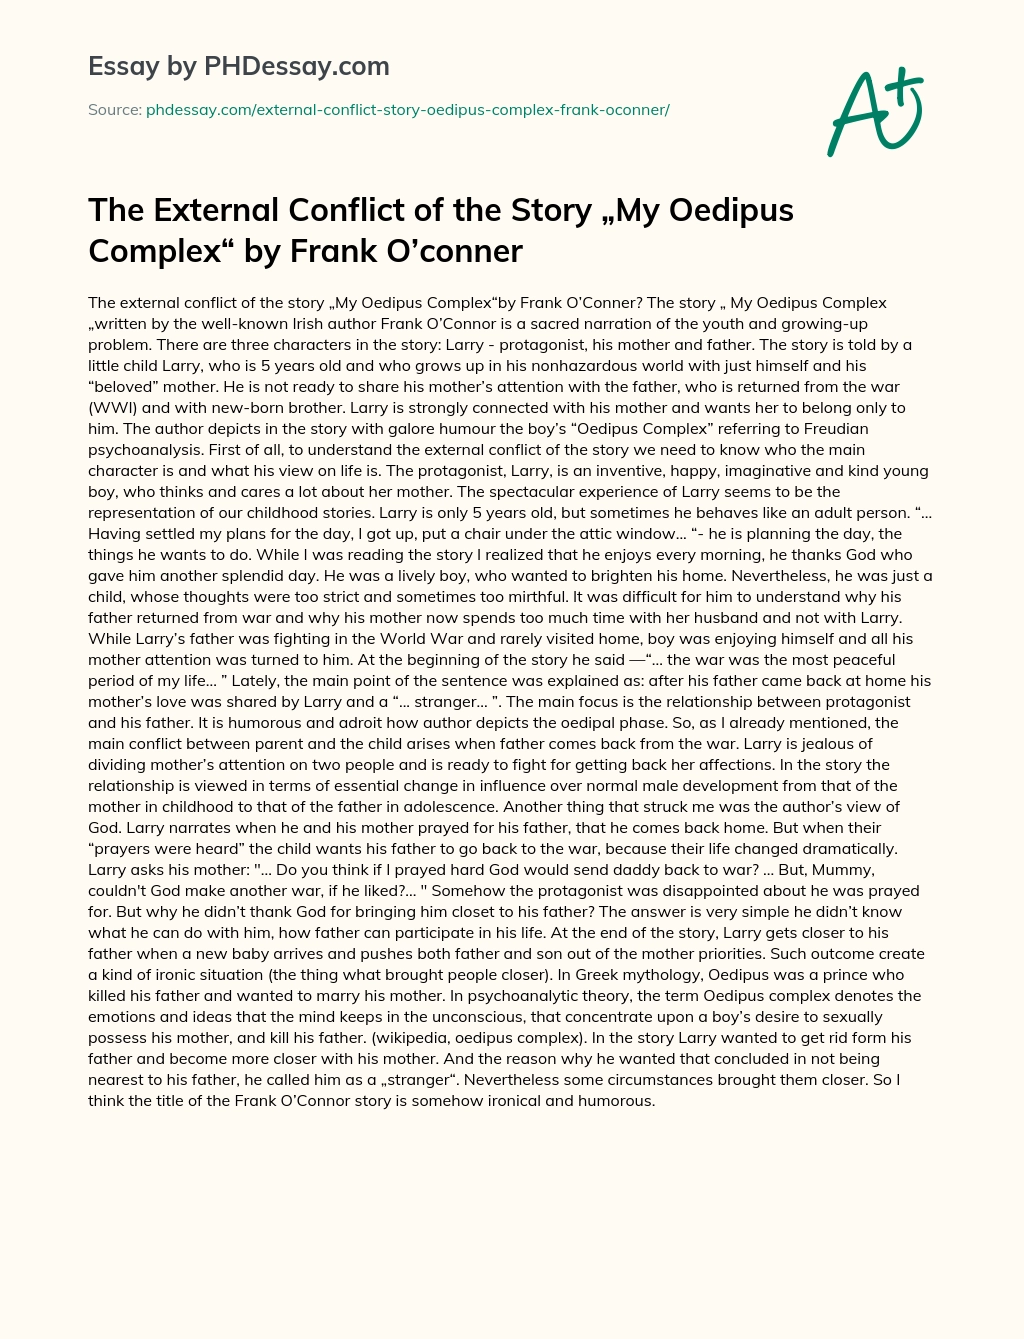 The External Conflict of the Story „My Oedipus Complex“ by Frank O’conner essay